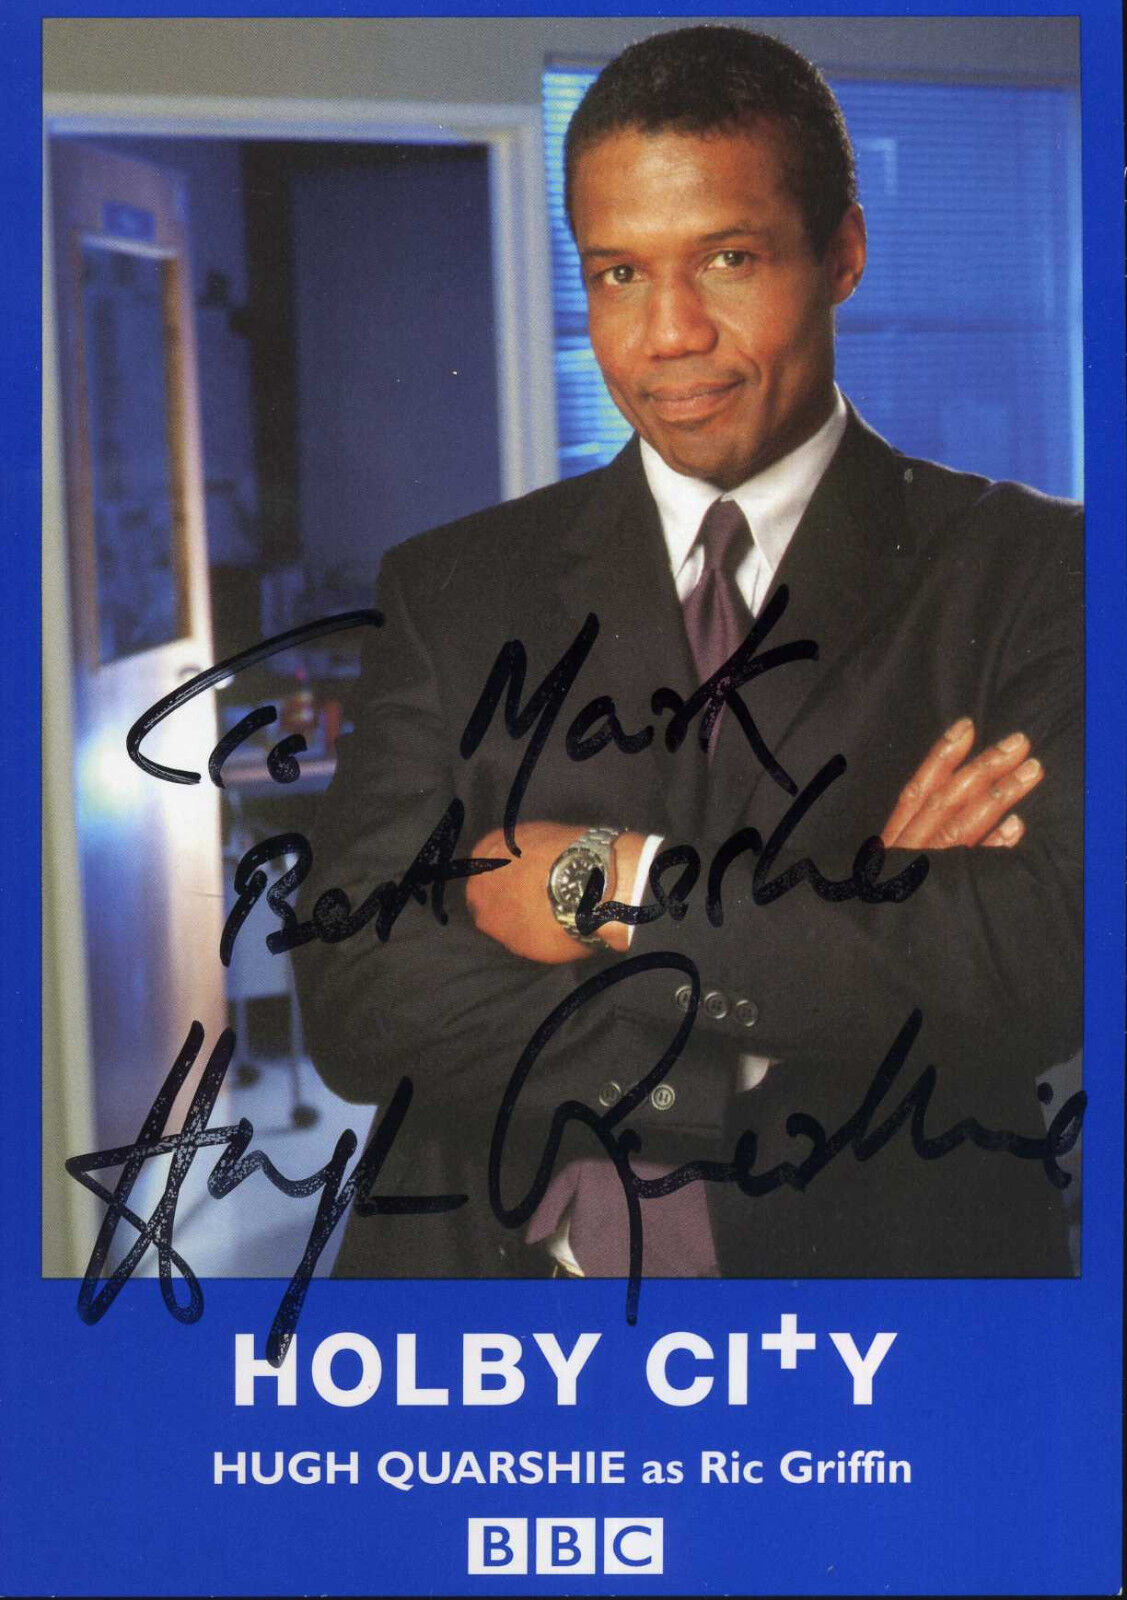 HUGH QUARSHIE Signed Photo Poster paintinggraph - TV & Film Star Actor 'Holby City' - preprint